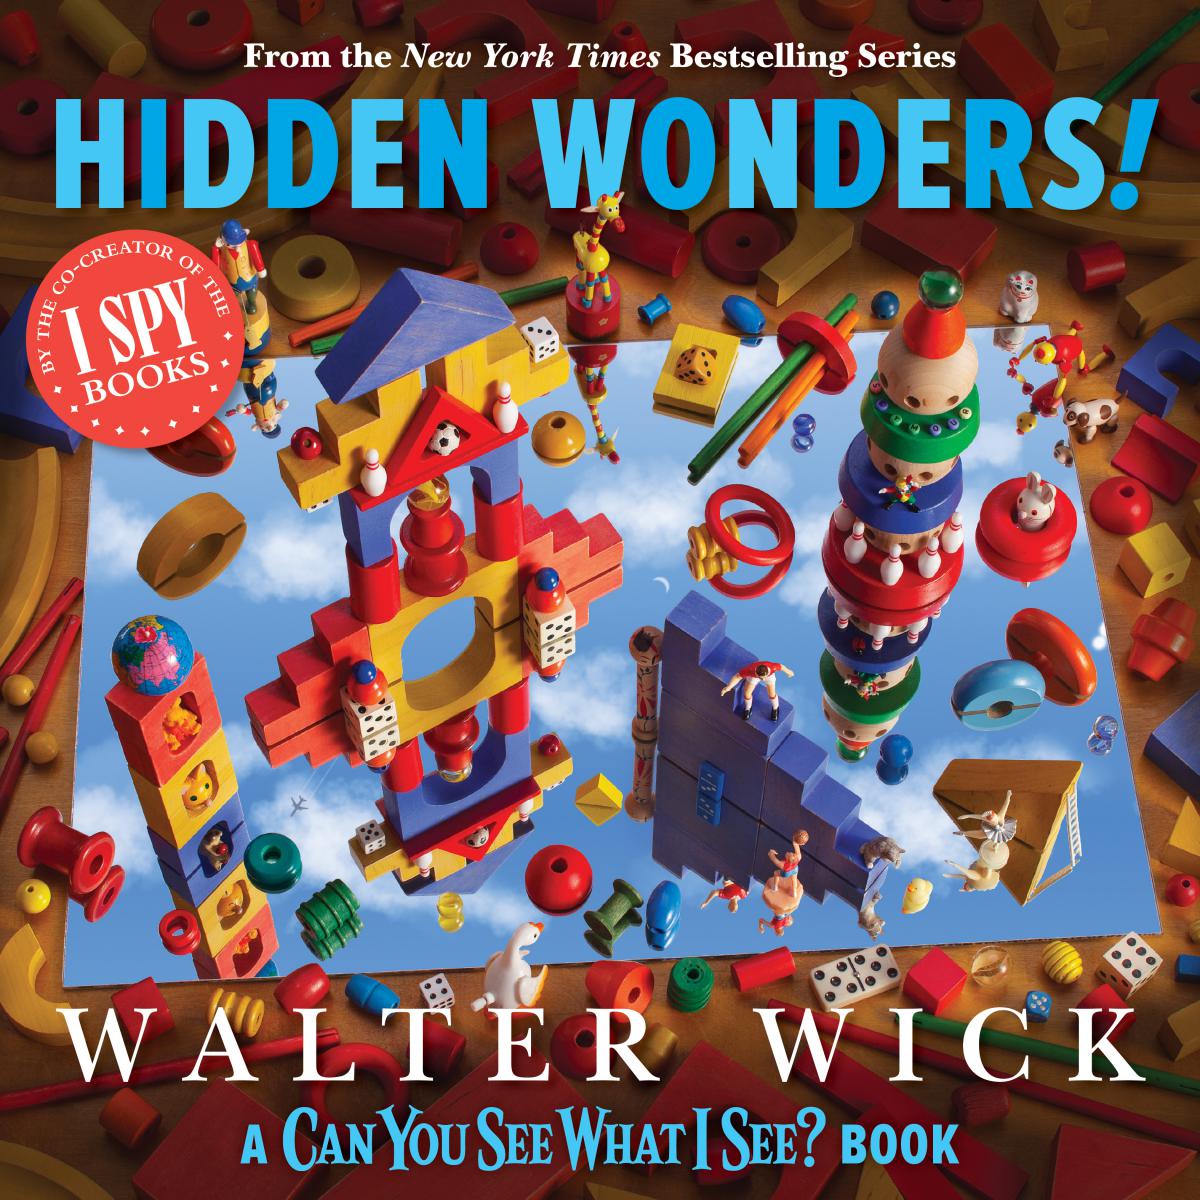 Can You See What I See?: Hidden Wonders (From the Co-Creator of I Spy) | Wick, Walter (Auteur) | Wick, Walter (Illustrateur)